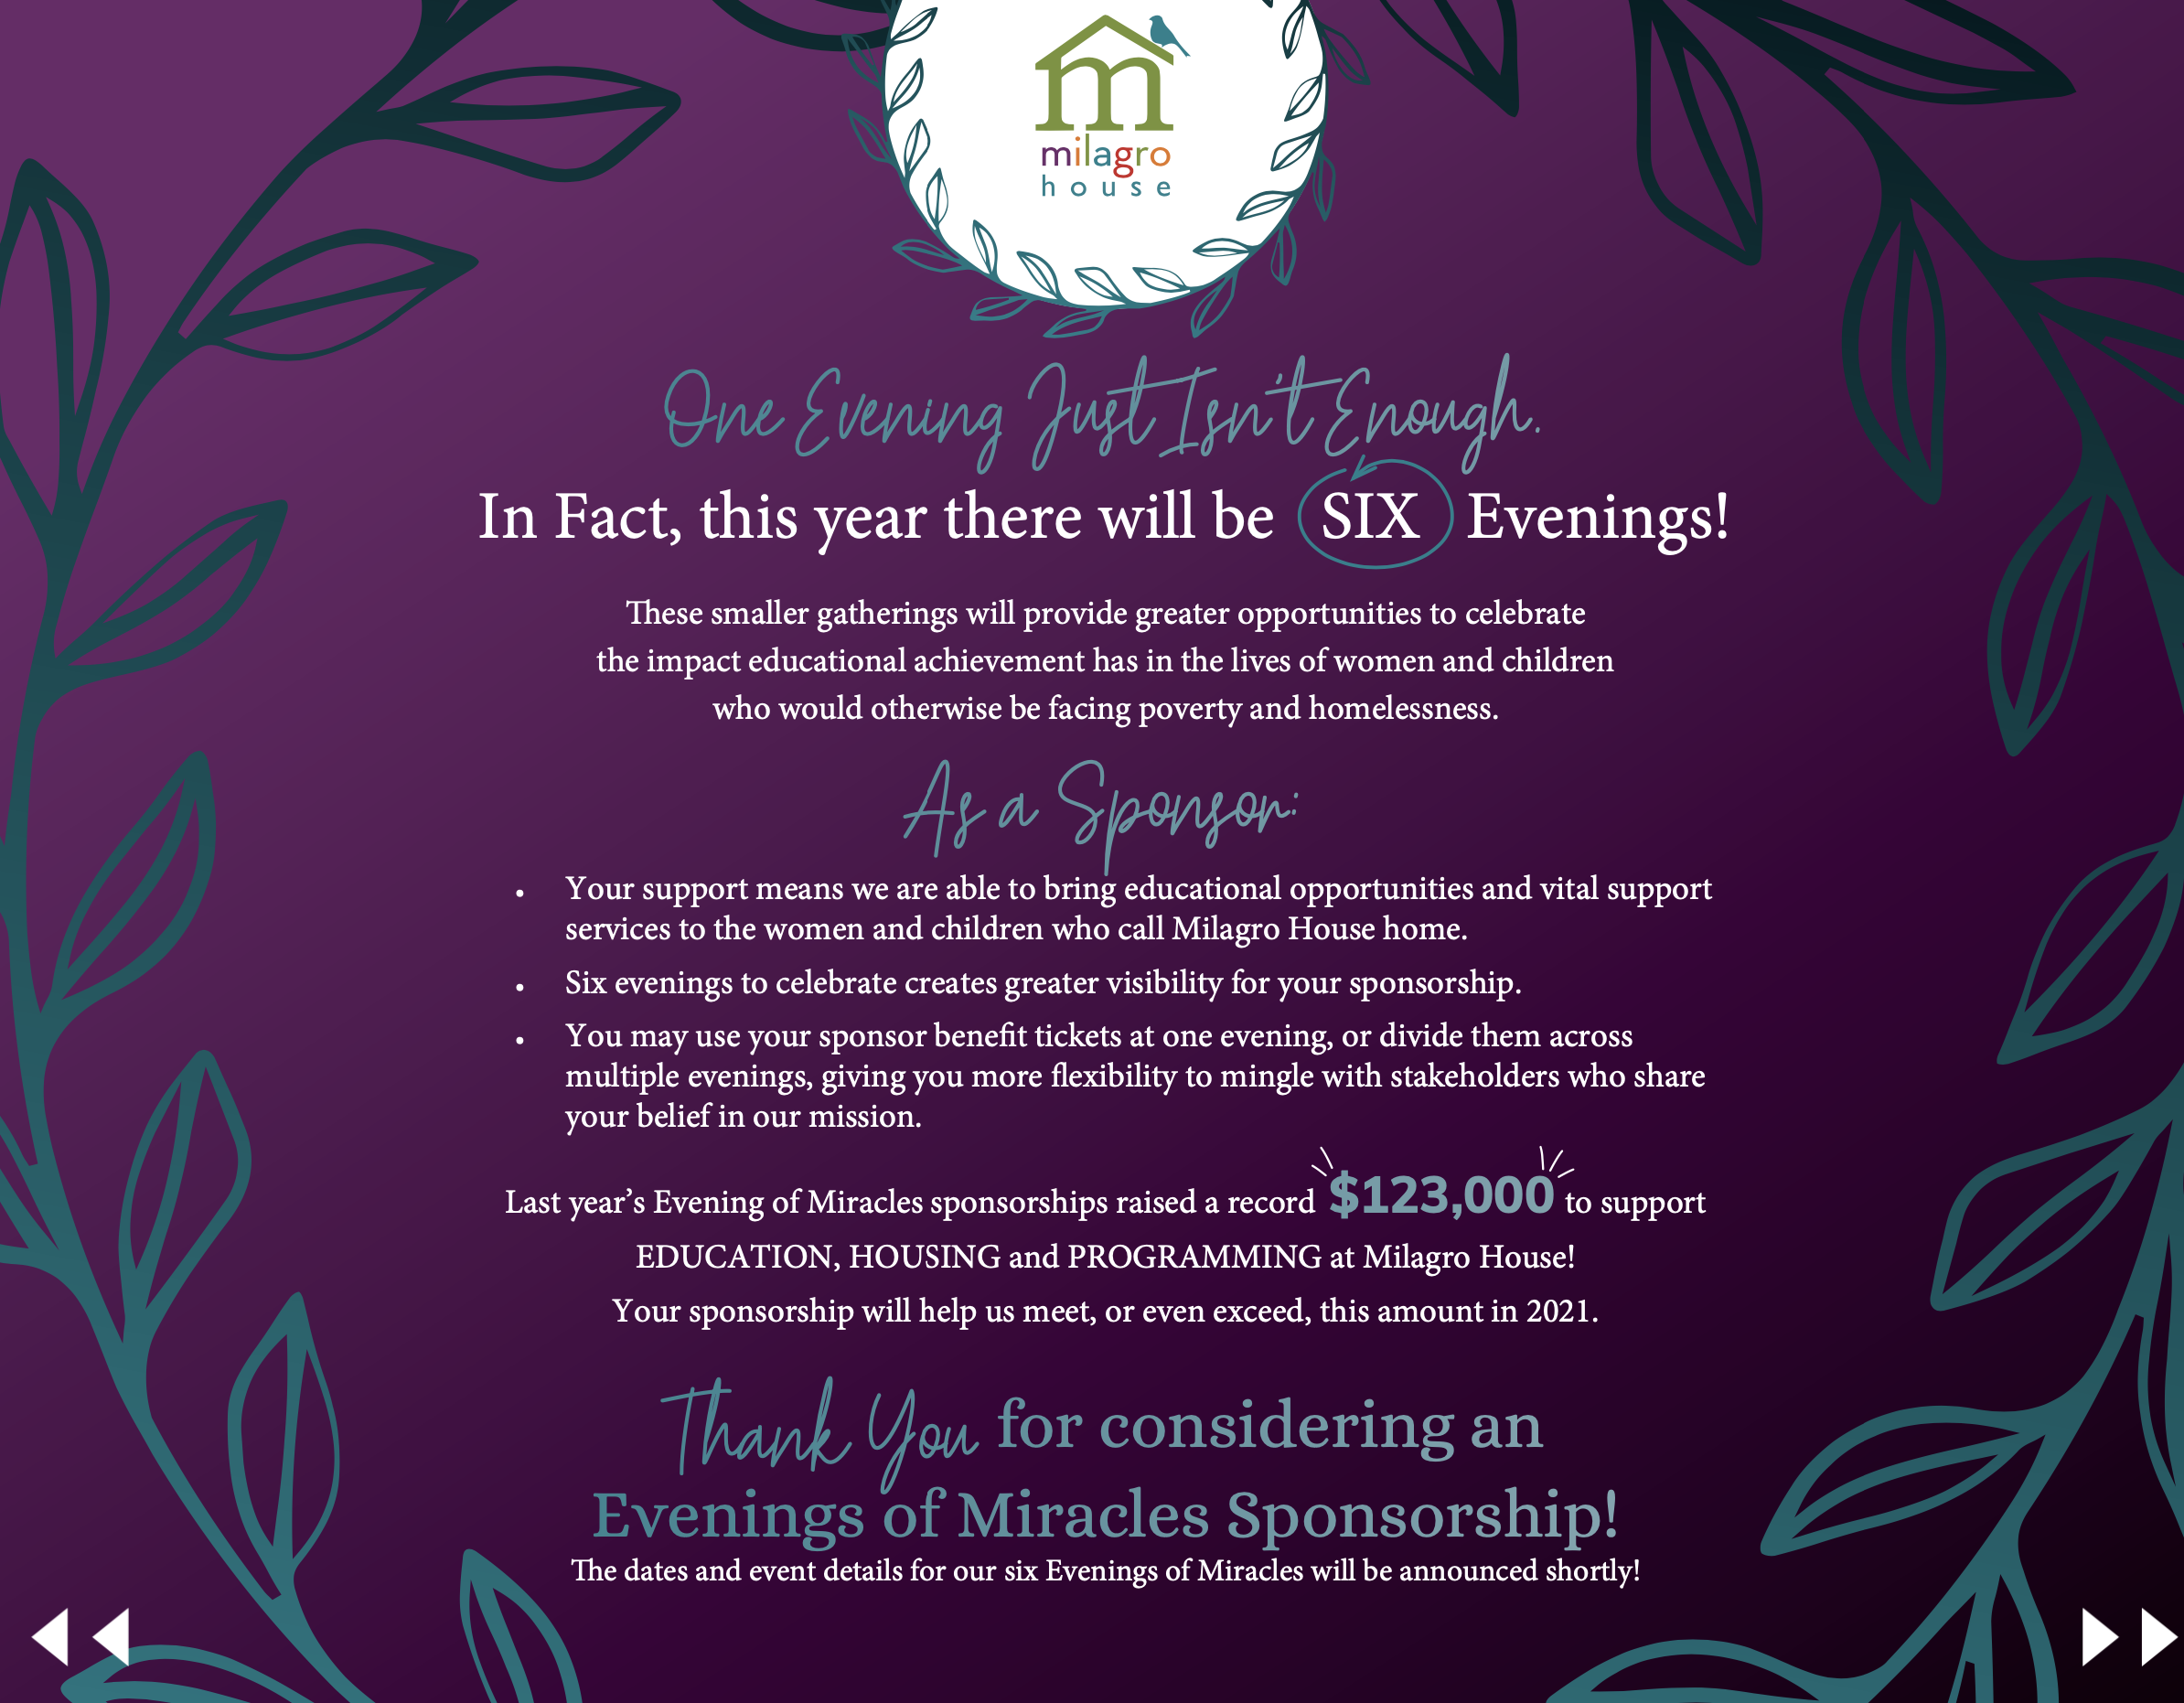 2021 2022 Evenings of Miracles Designs for Milagro House Graphic Designed by Lancaster, PA Graphic & Web Designer Rachel Lynn Heisey Design